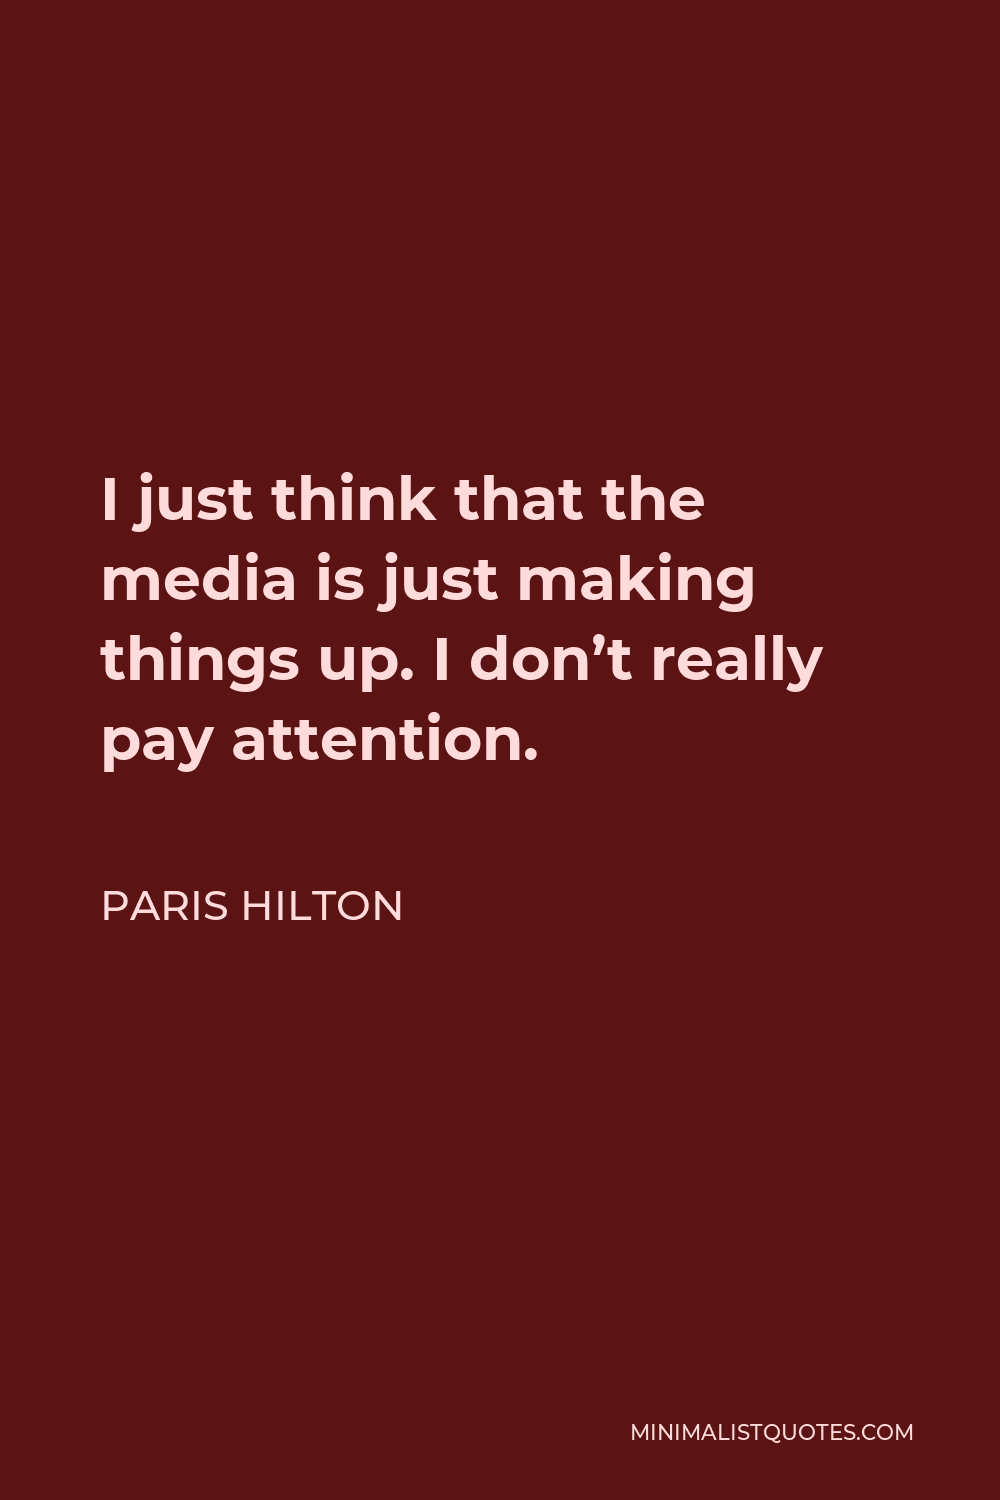 Paris Hilton Quote - I just think that the media is just making things up. I don’t really pay attention.